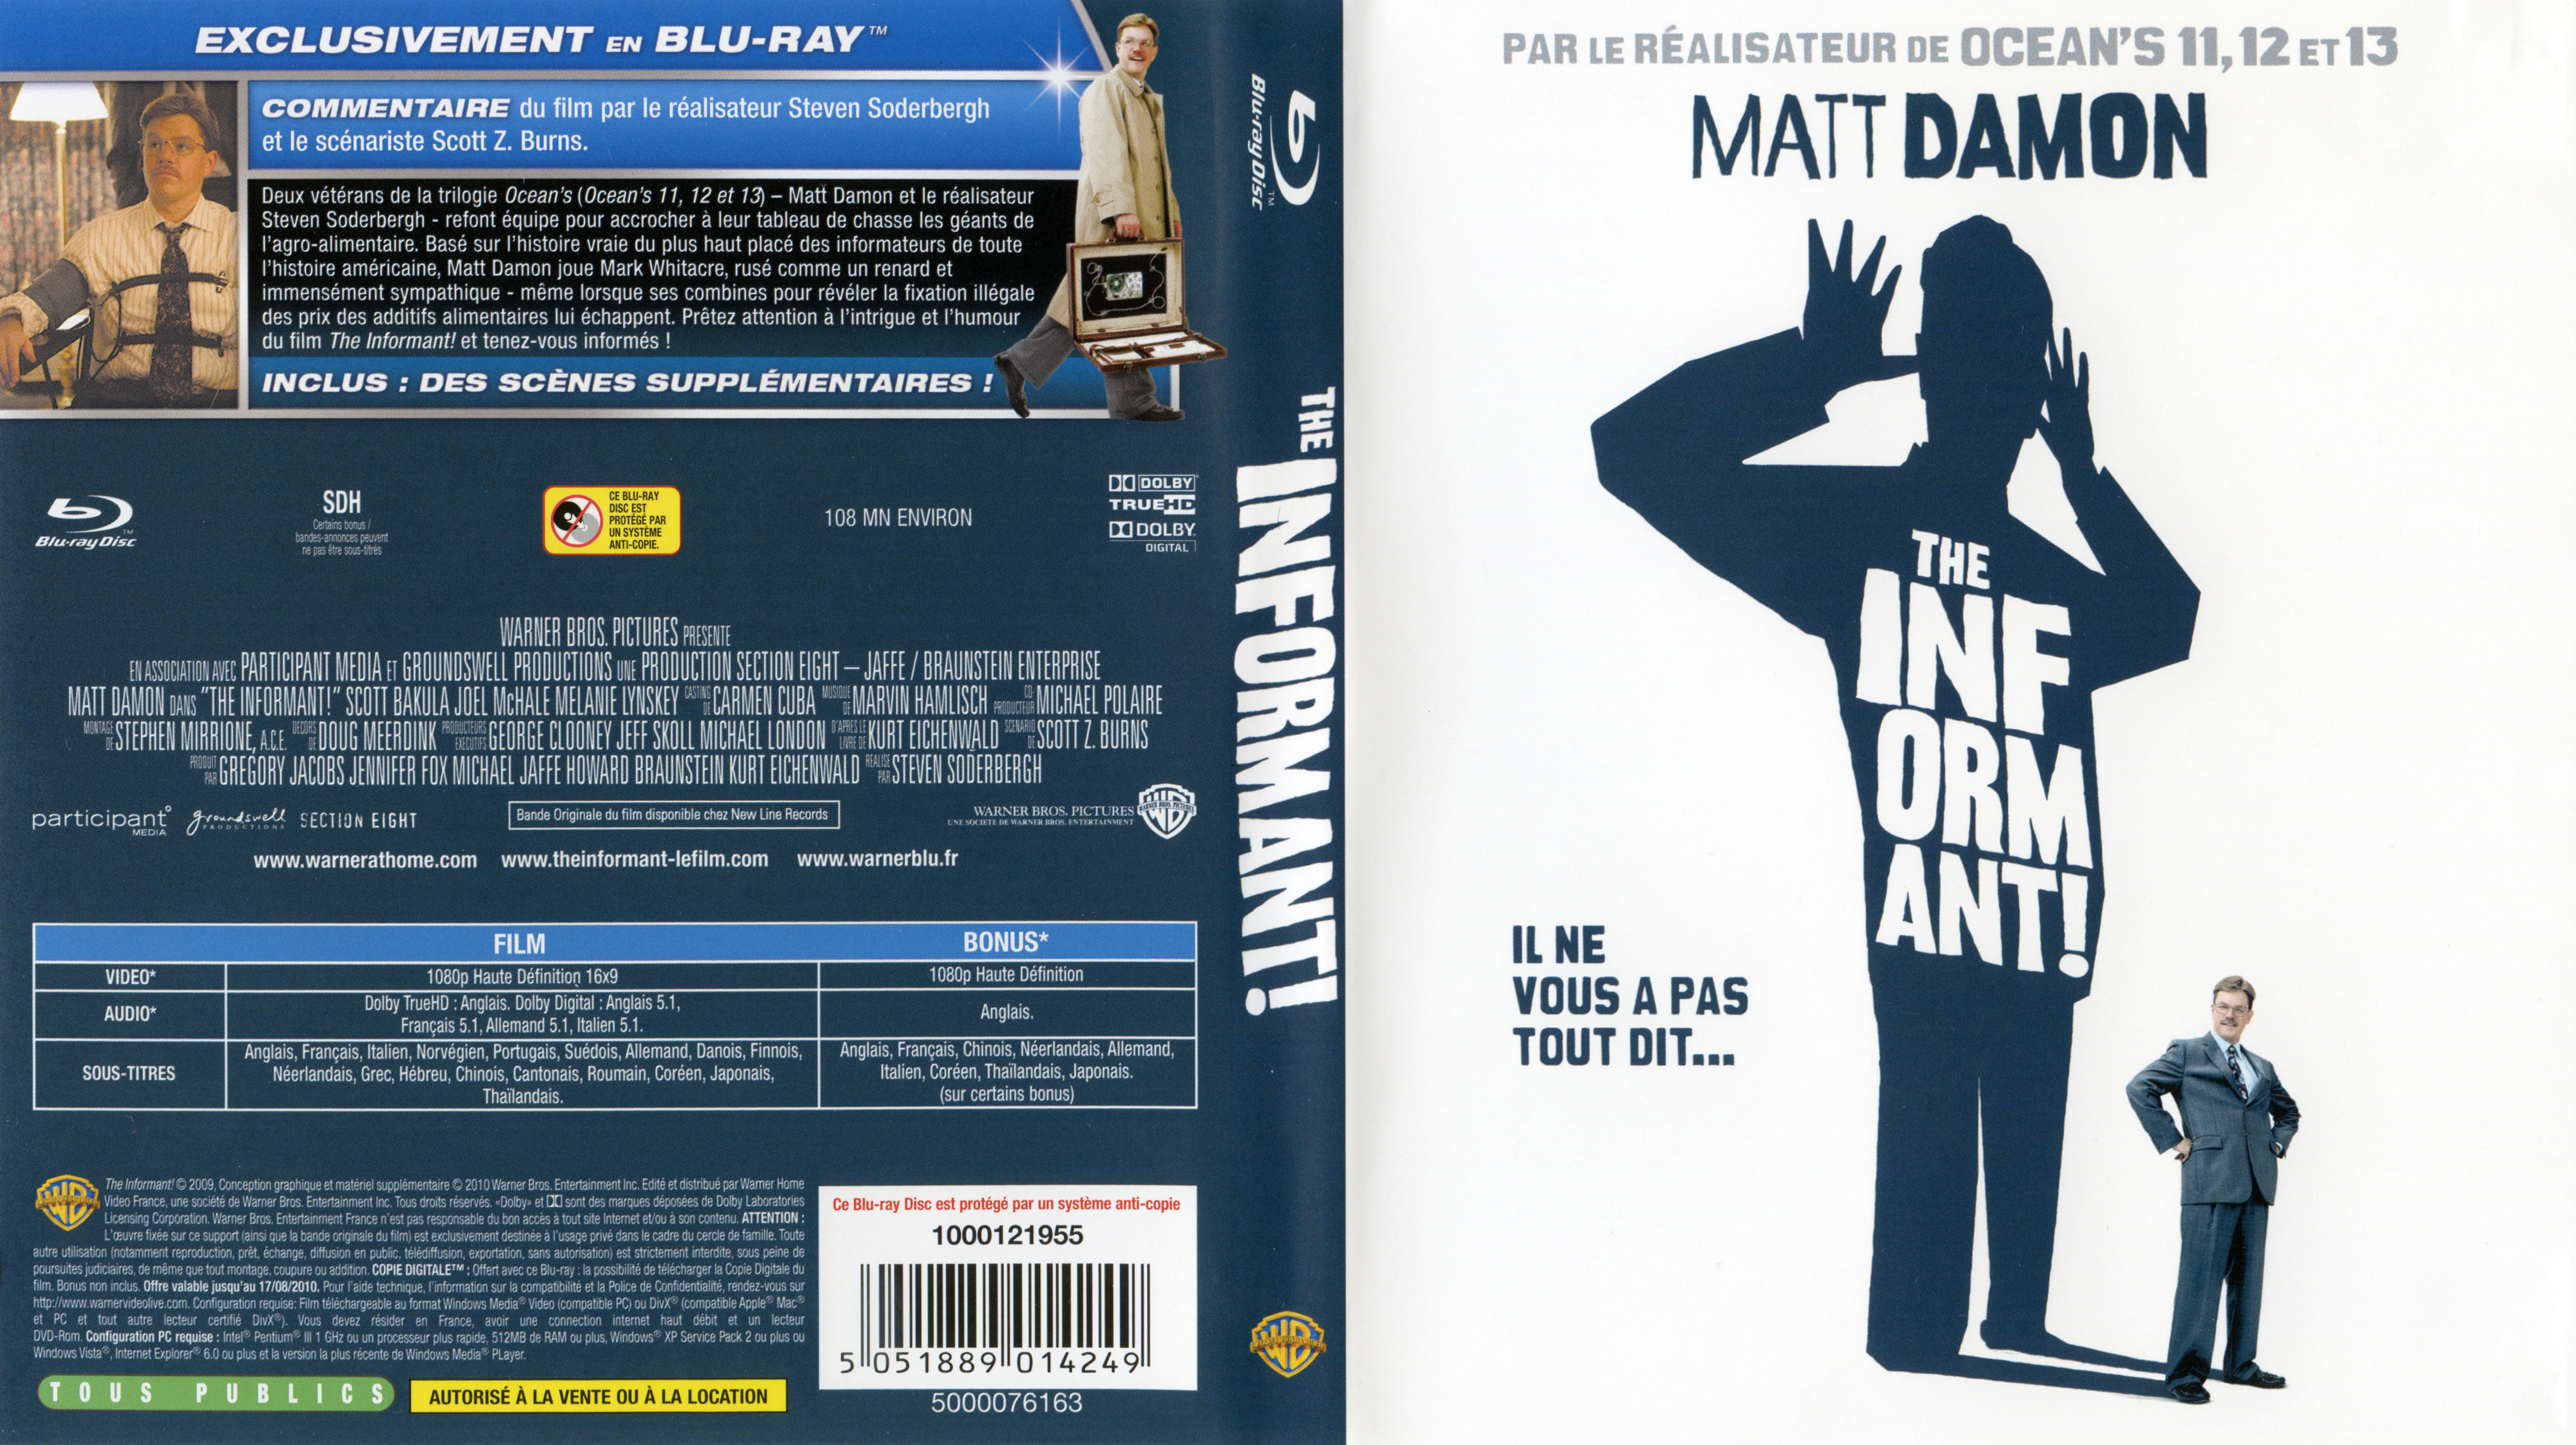 Jaquette DVD The informant (BLU-RAY)